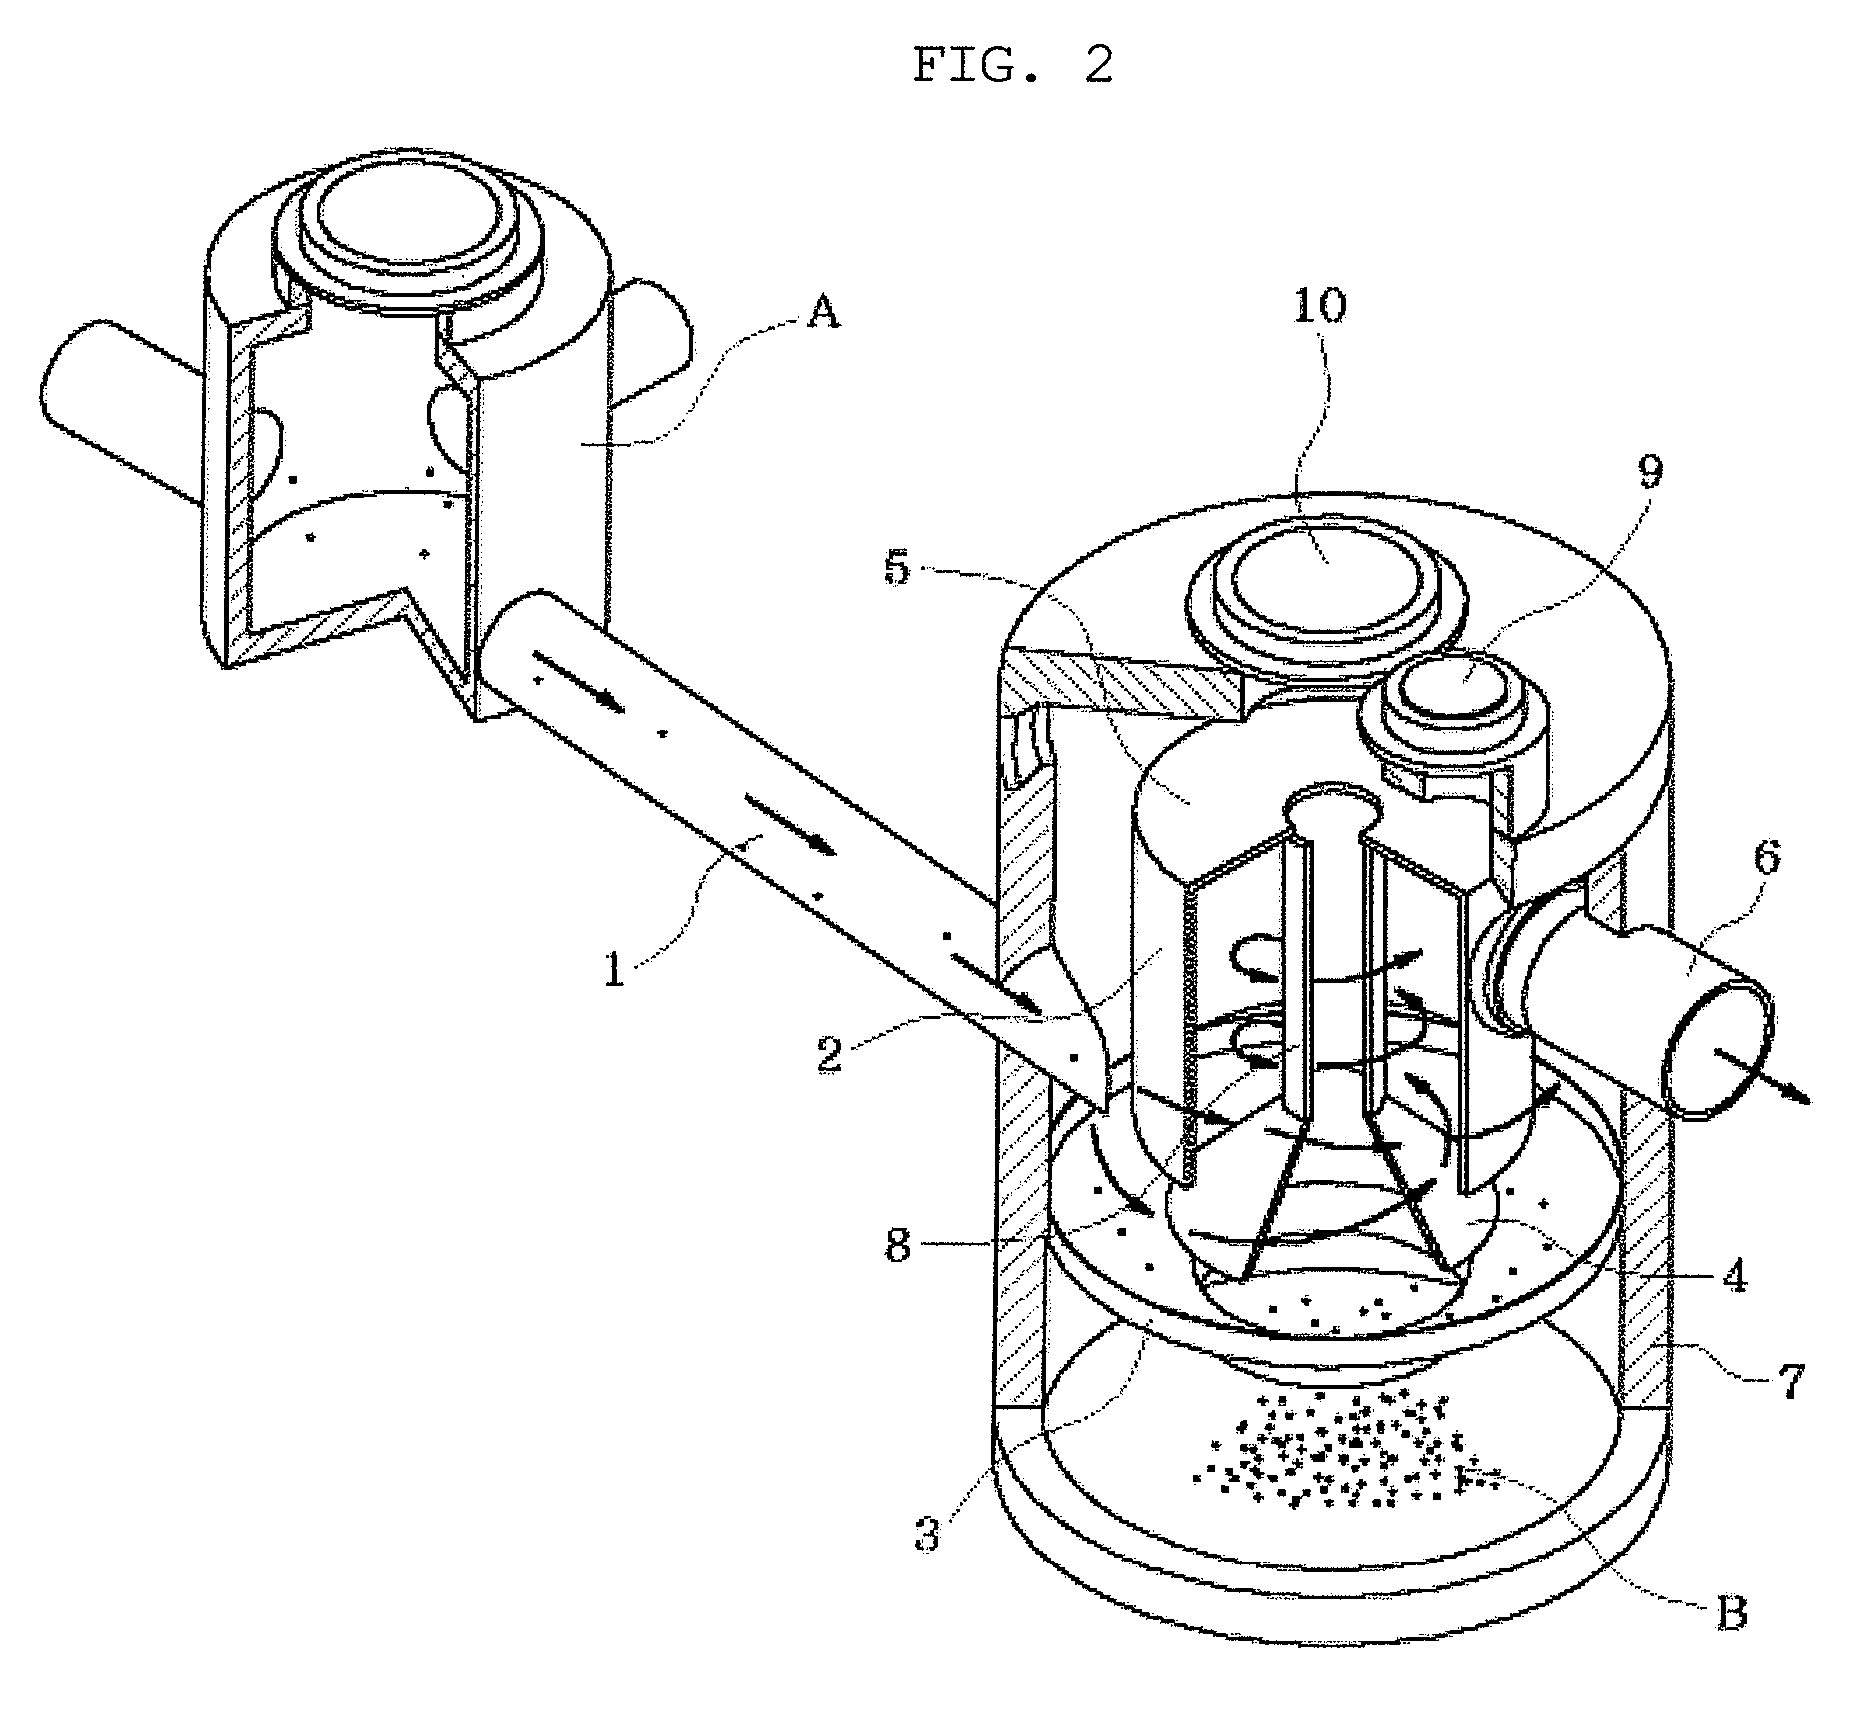 Vortex separator for separating floating and settling substances from centrally inflowing storm-water